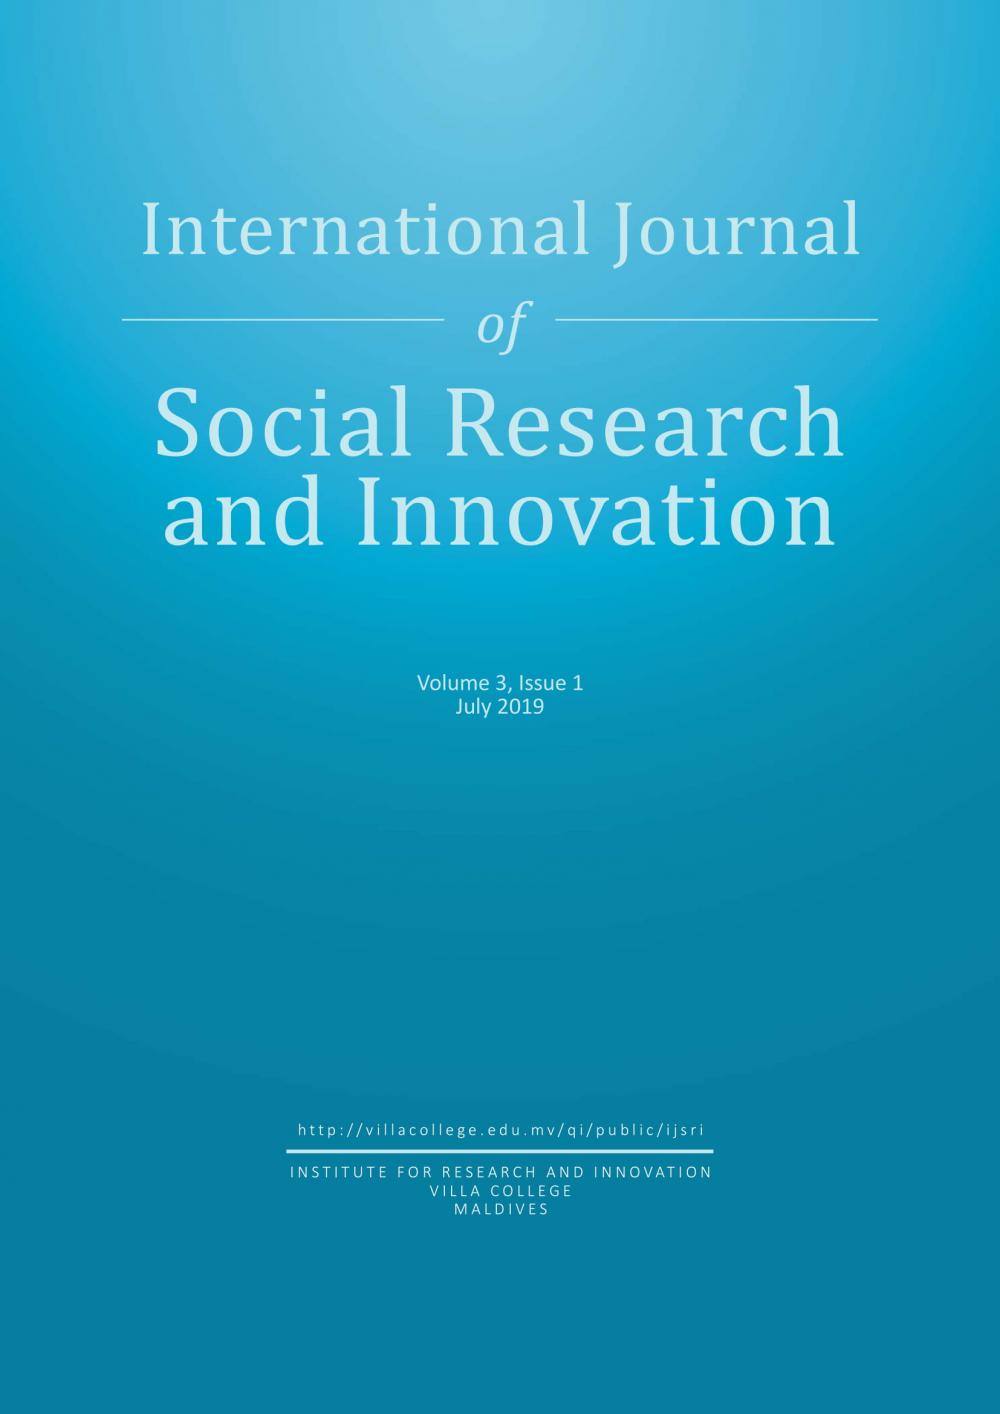 					View Vol. 3 No. 1 (2019): International Journal of Social Research and Innovation
				